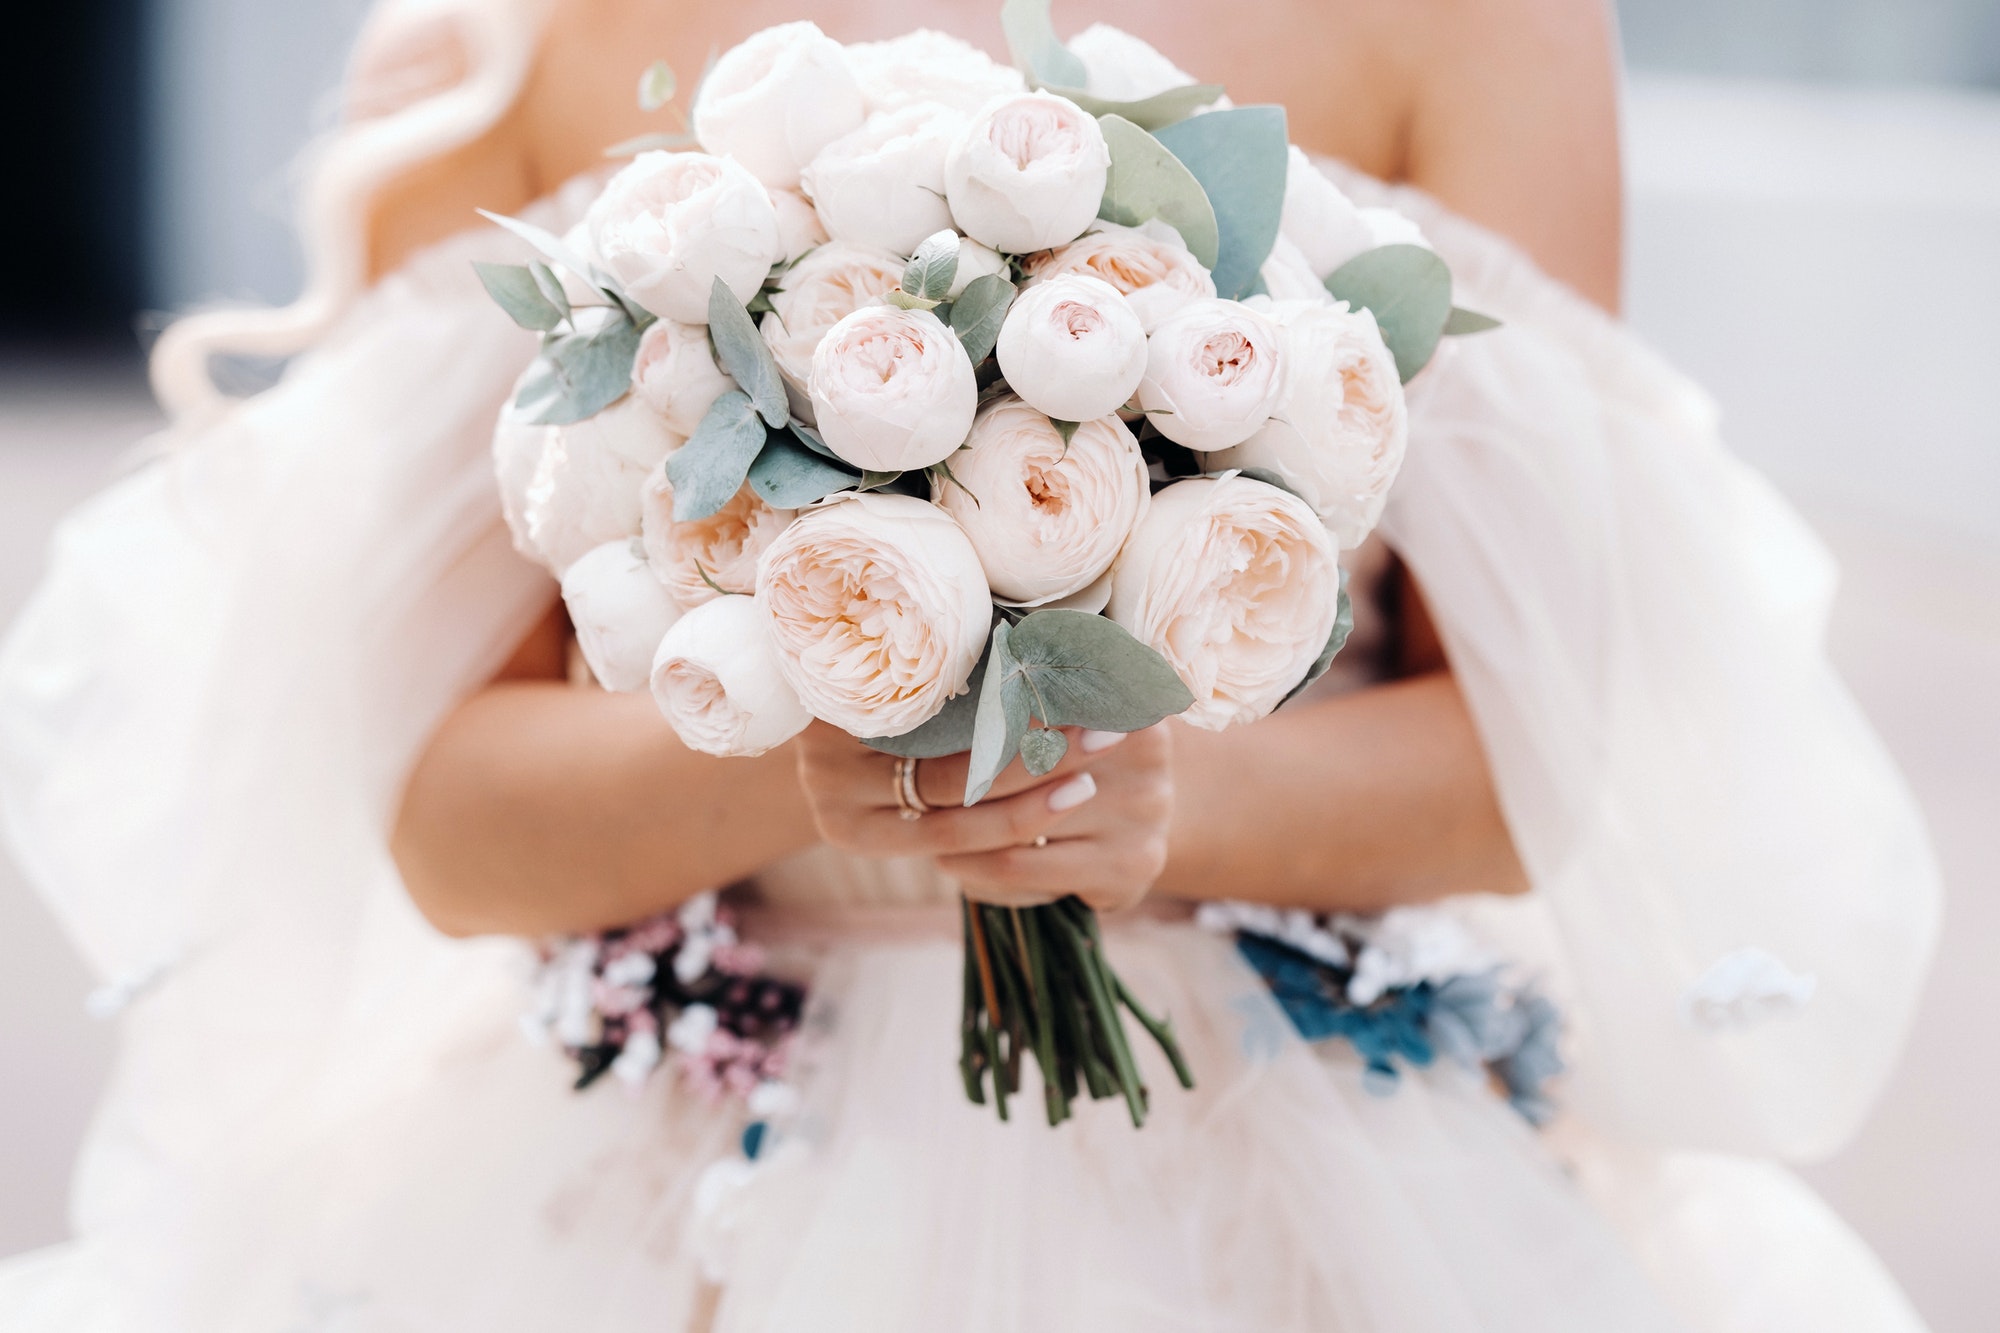 A bride in a wedding dress holds a bouquet of roses in her hands in front of her .close up